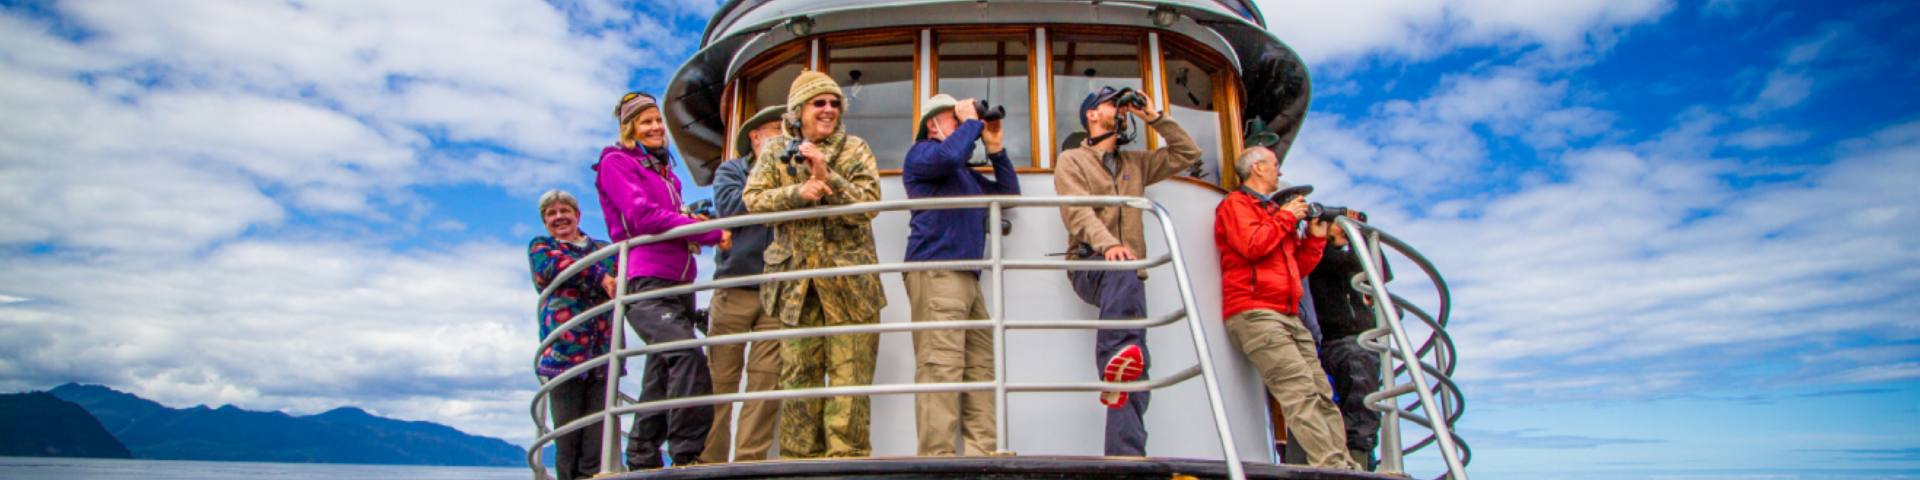 A tour group looks out over the ocean from the bridge of the boat. 3 of them are using binoculars.